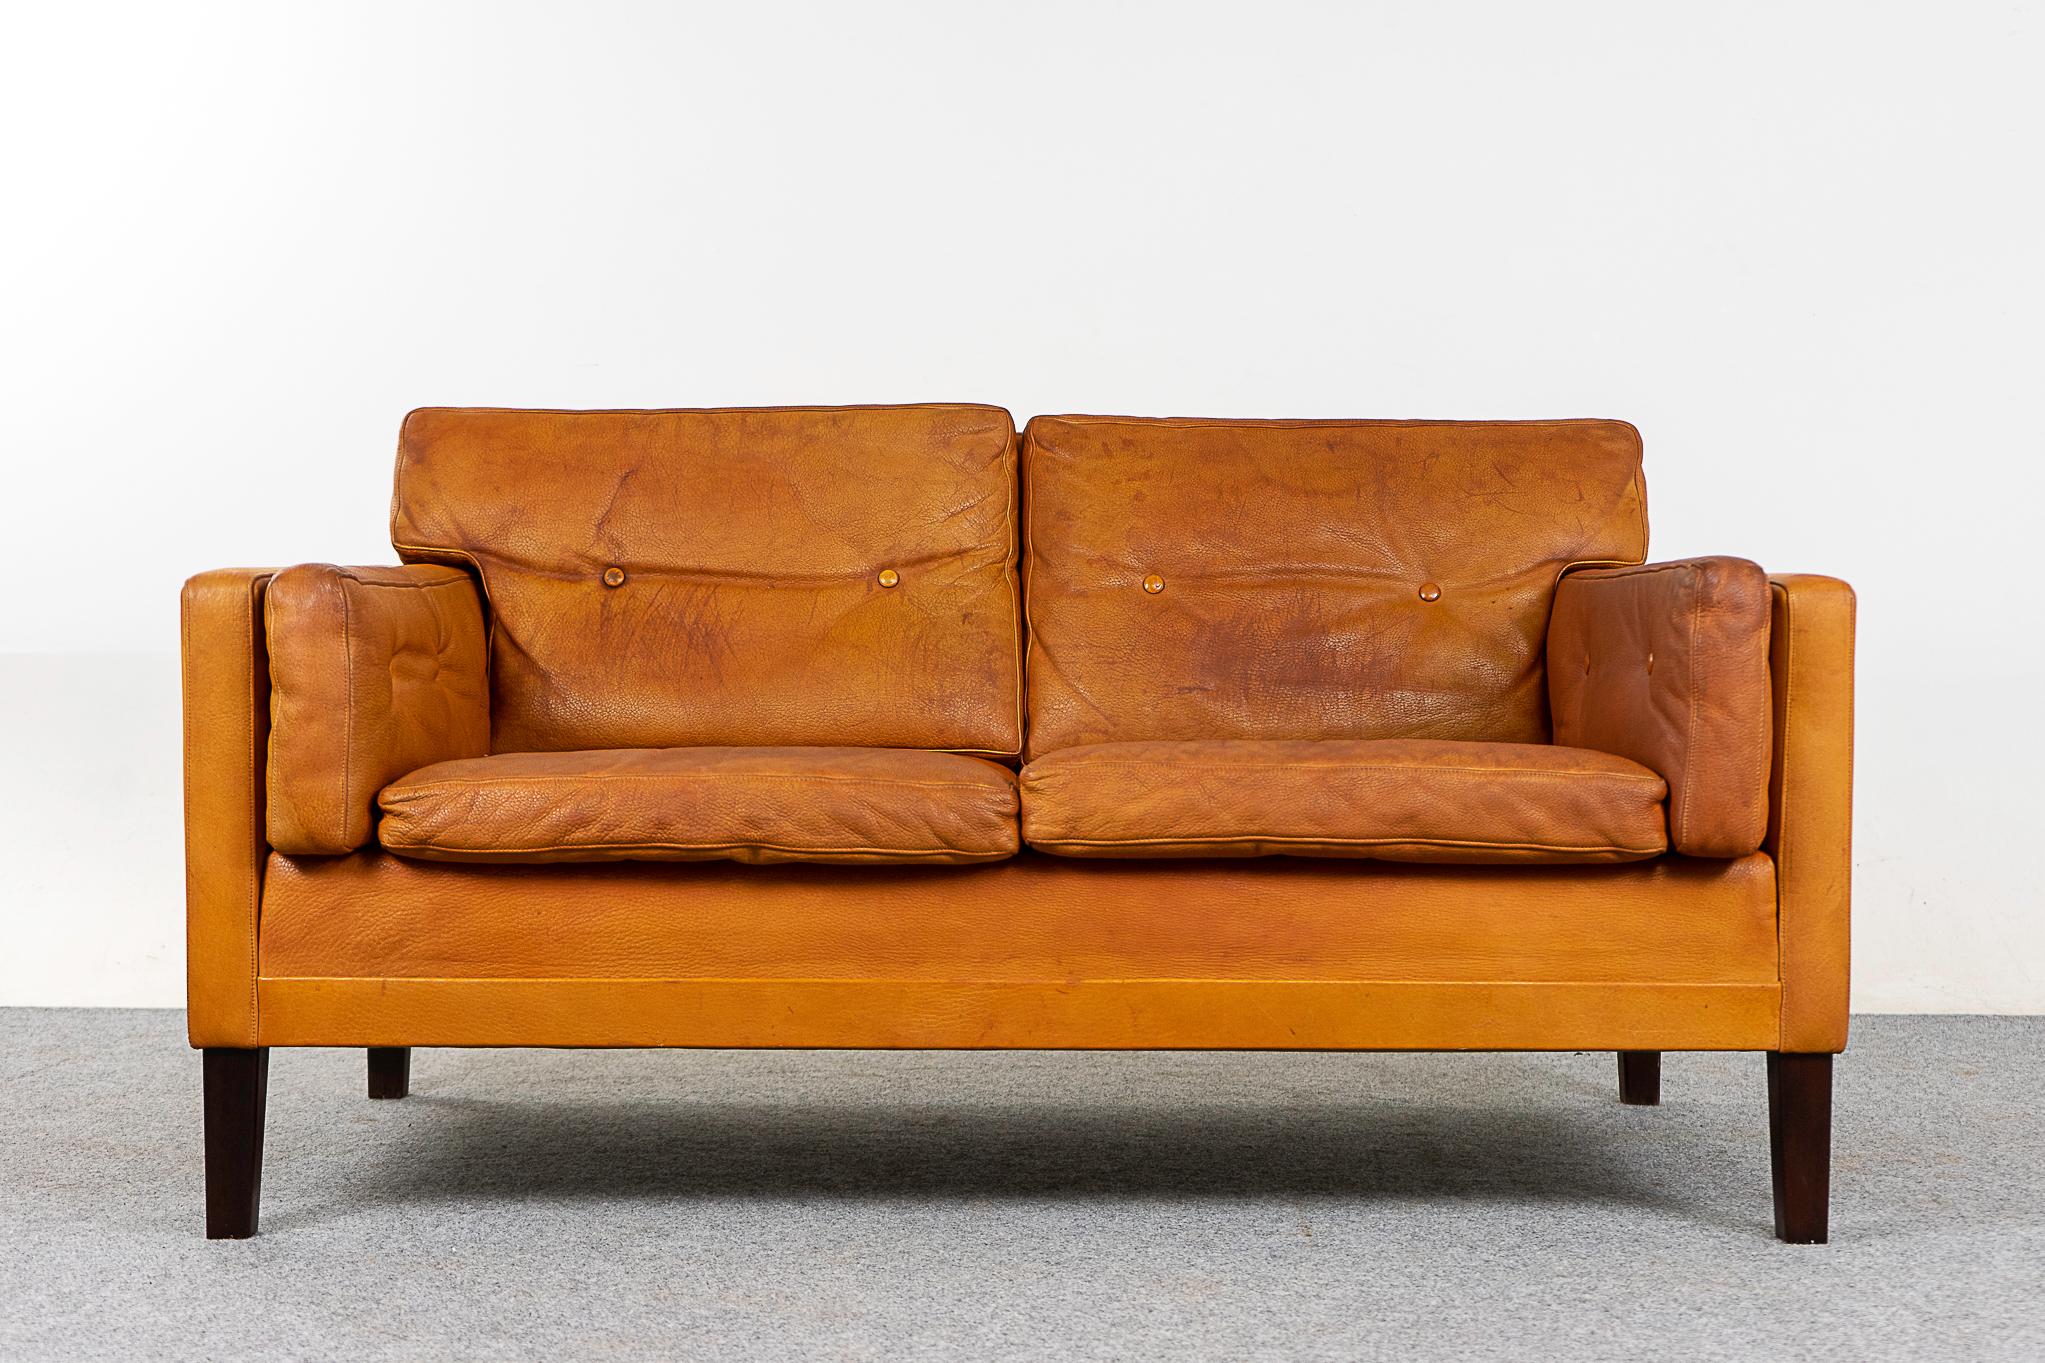 Leather Danish loveseat, circa 1960's. Well loved original tobacco leather upholstery and solid wood legs. Some wear and tear, as shown in photos. 

Please inquire for remote and international shipping rates.